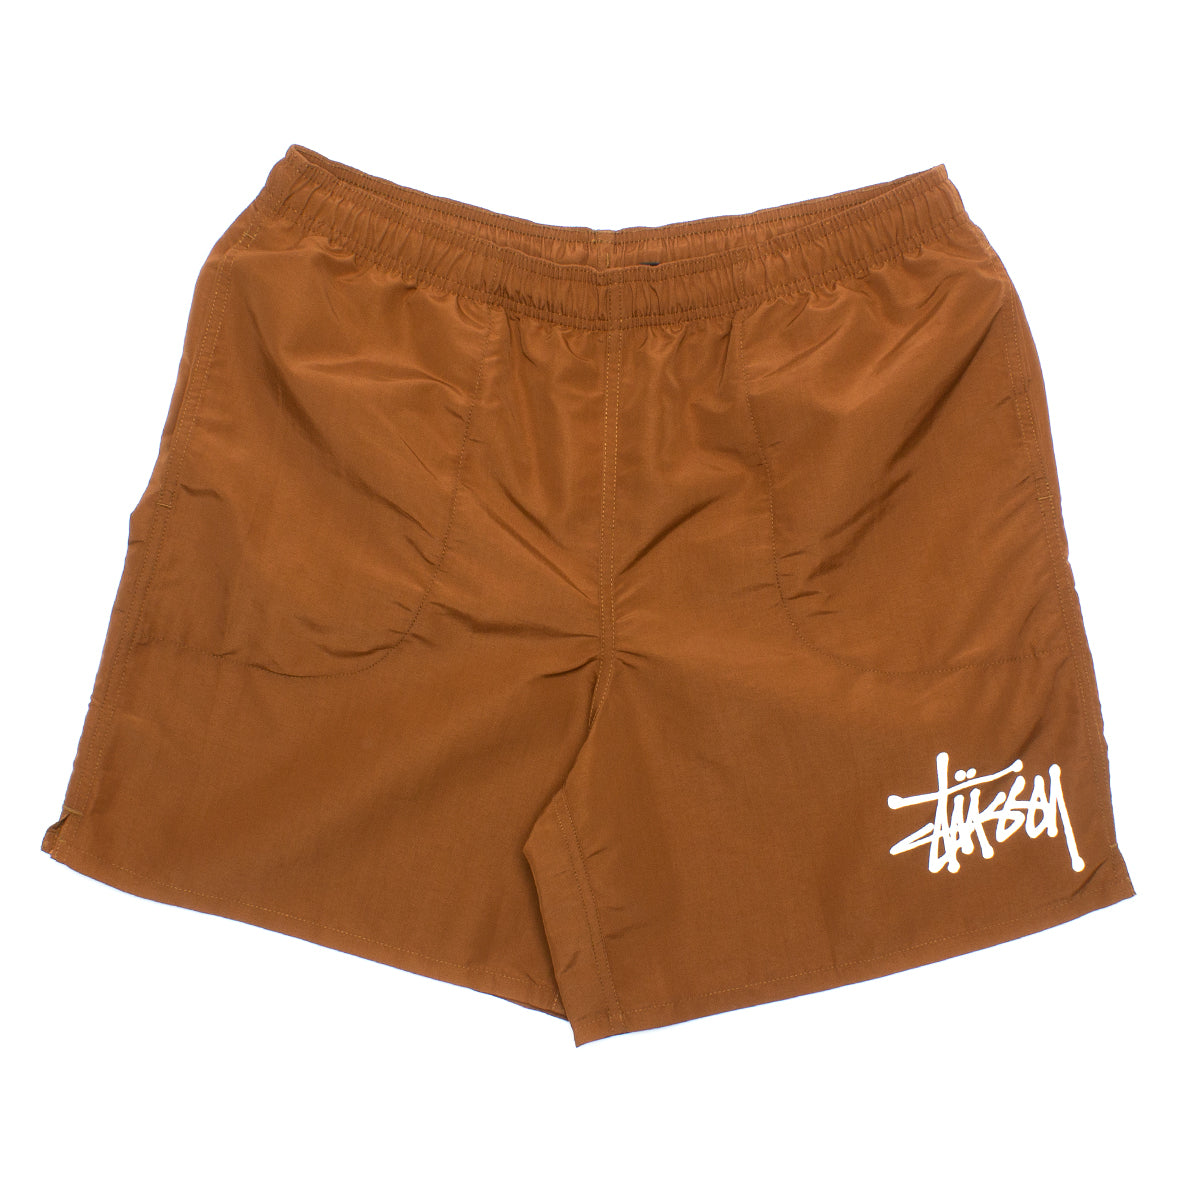 Stussy | Big Basic Water Short Style # 113156 Color : Coffee